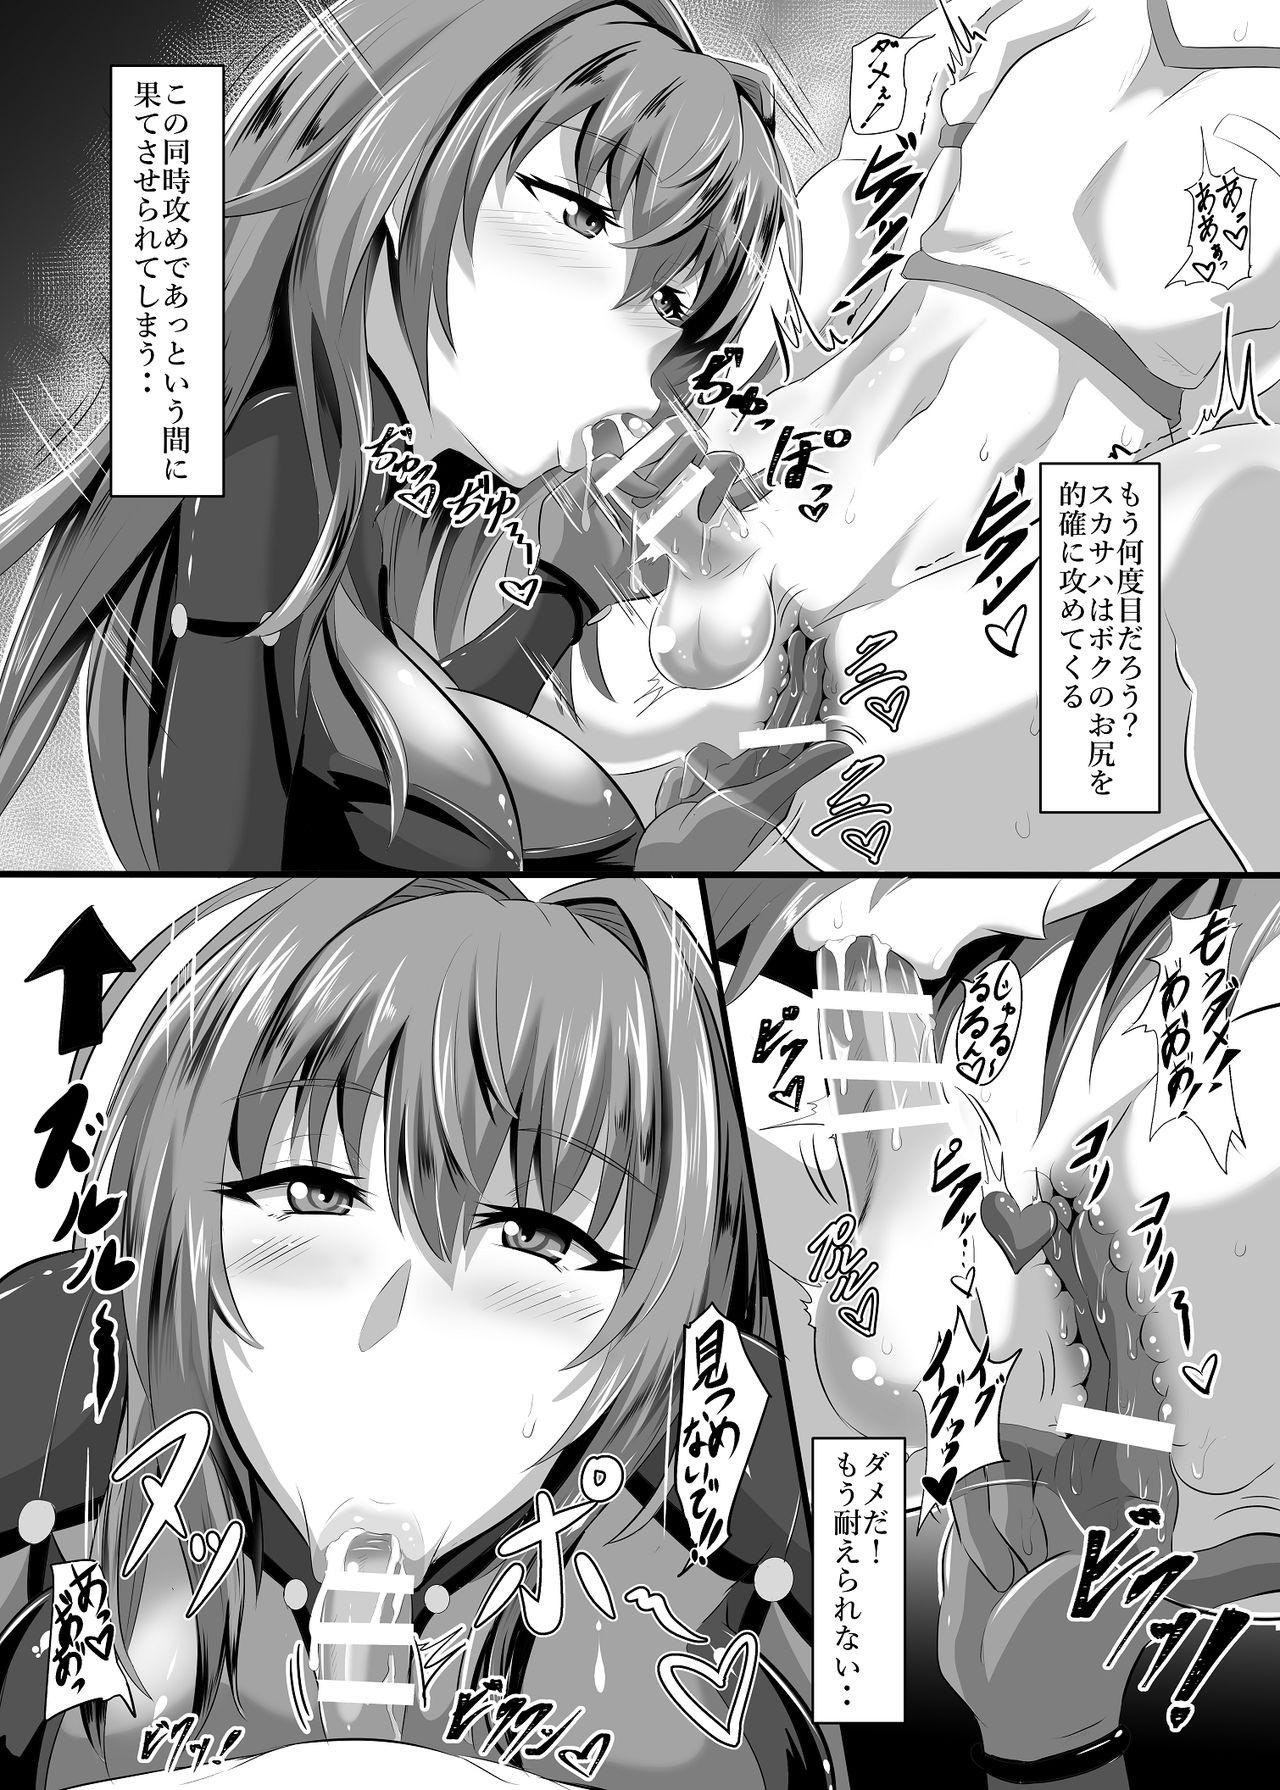 Young Tits Gehenna 5 - Fate grand order Fucking Sex - Page 6